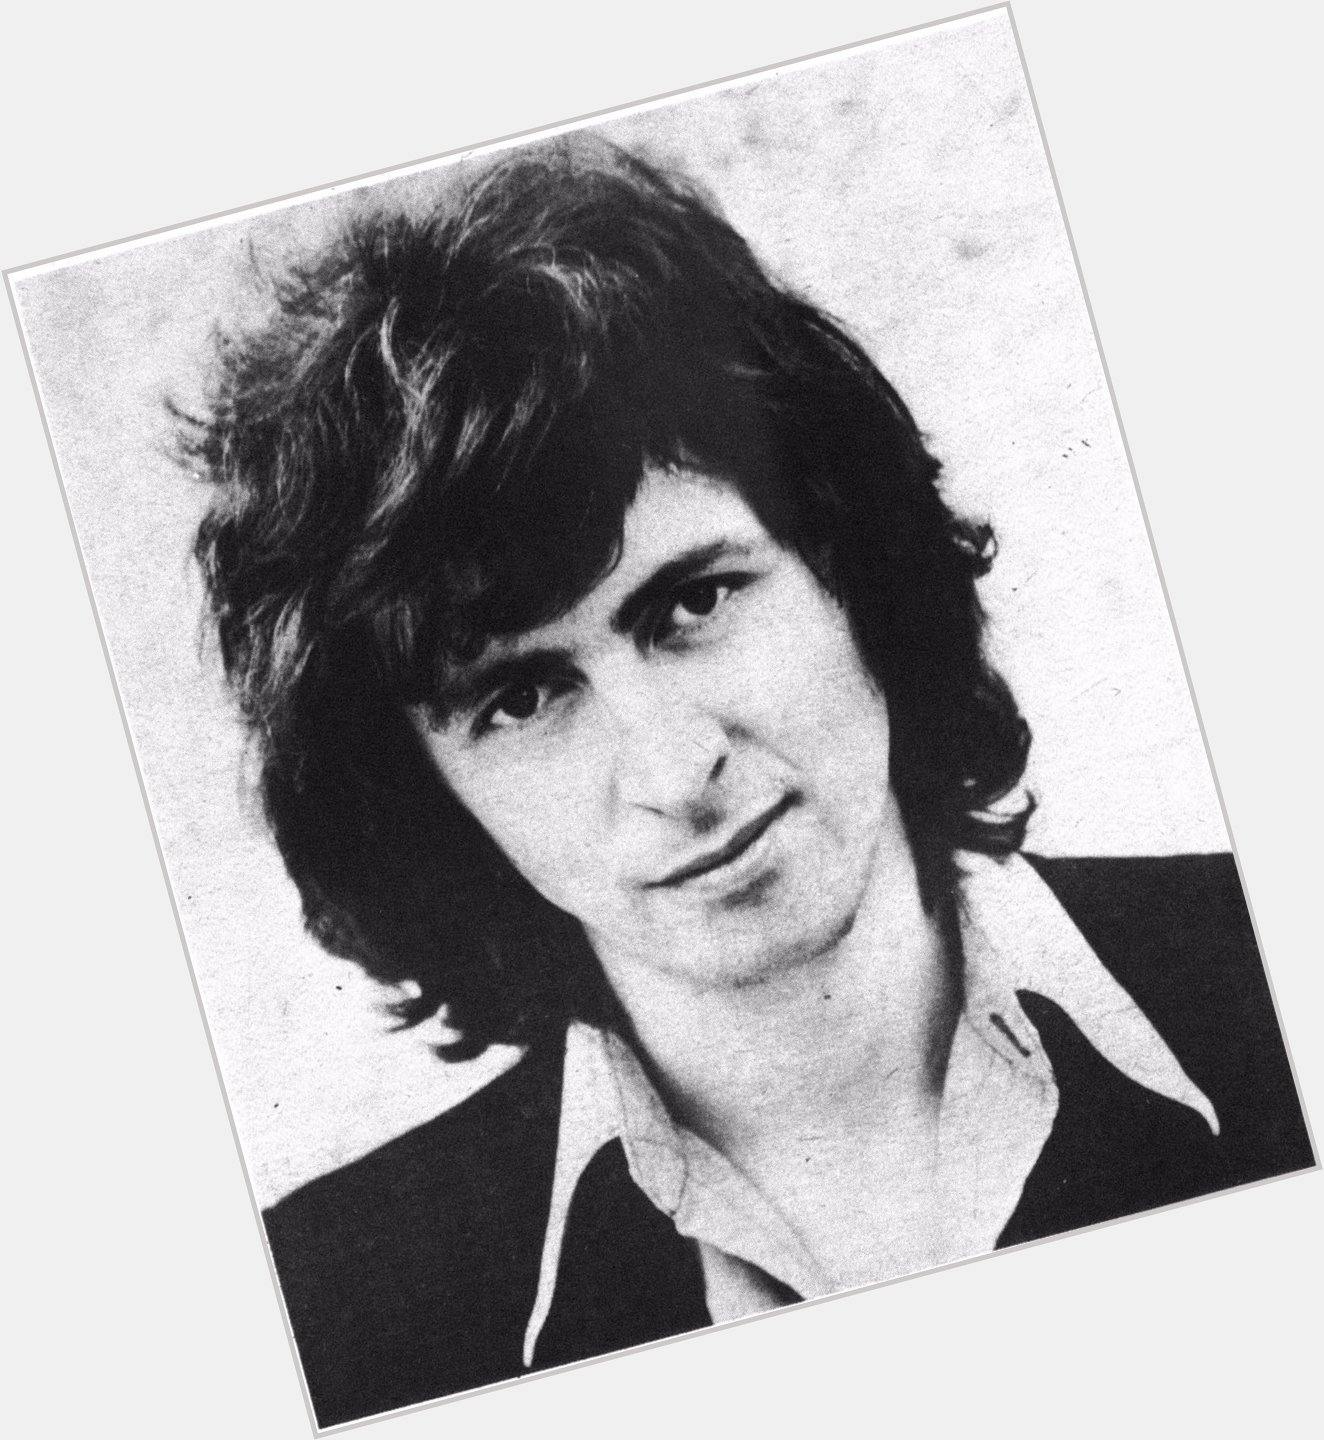 Happy Birthday to Al Stewart (Year of the Cat/On the Border) born Sep 5th 1945 